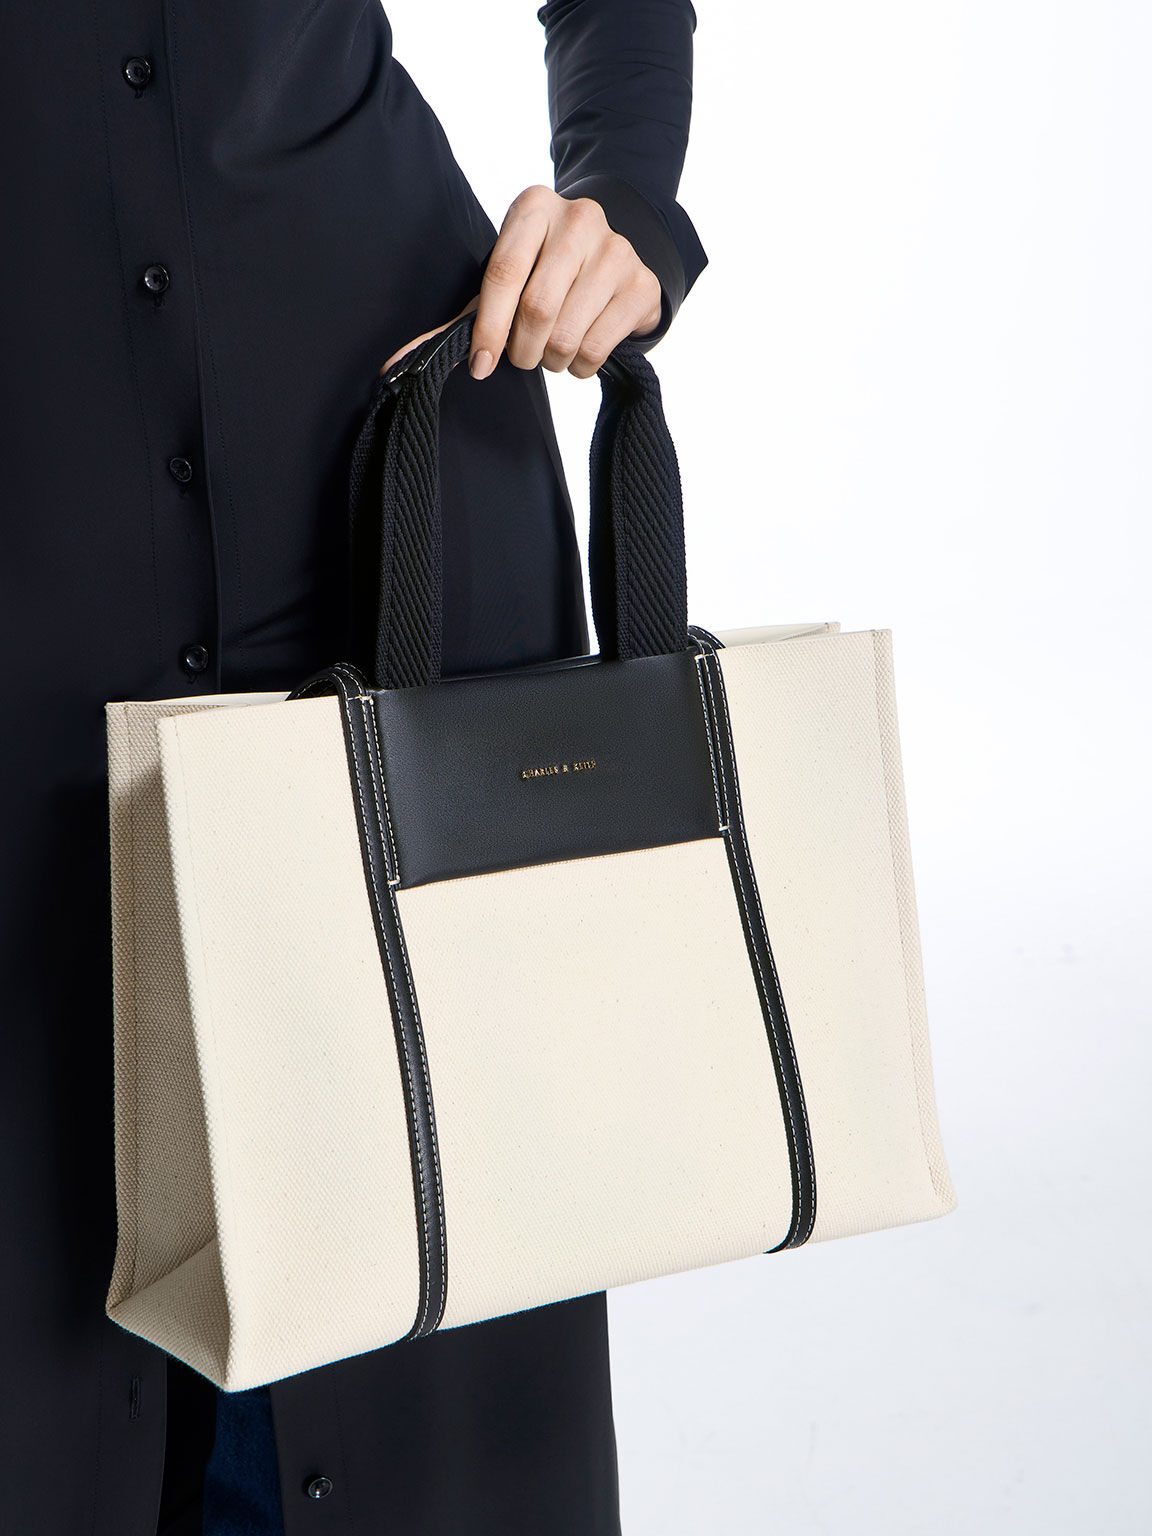 Shop Charles Keith Tote Bags online